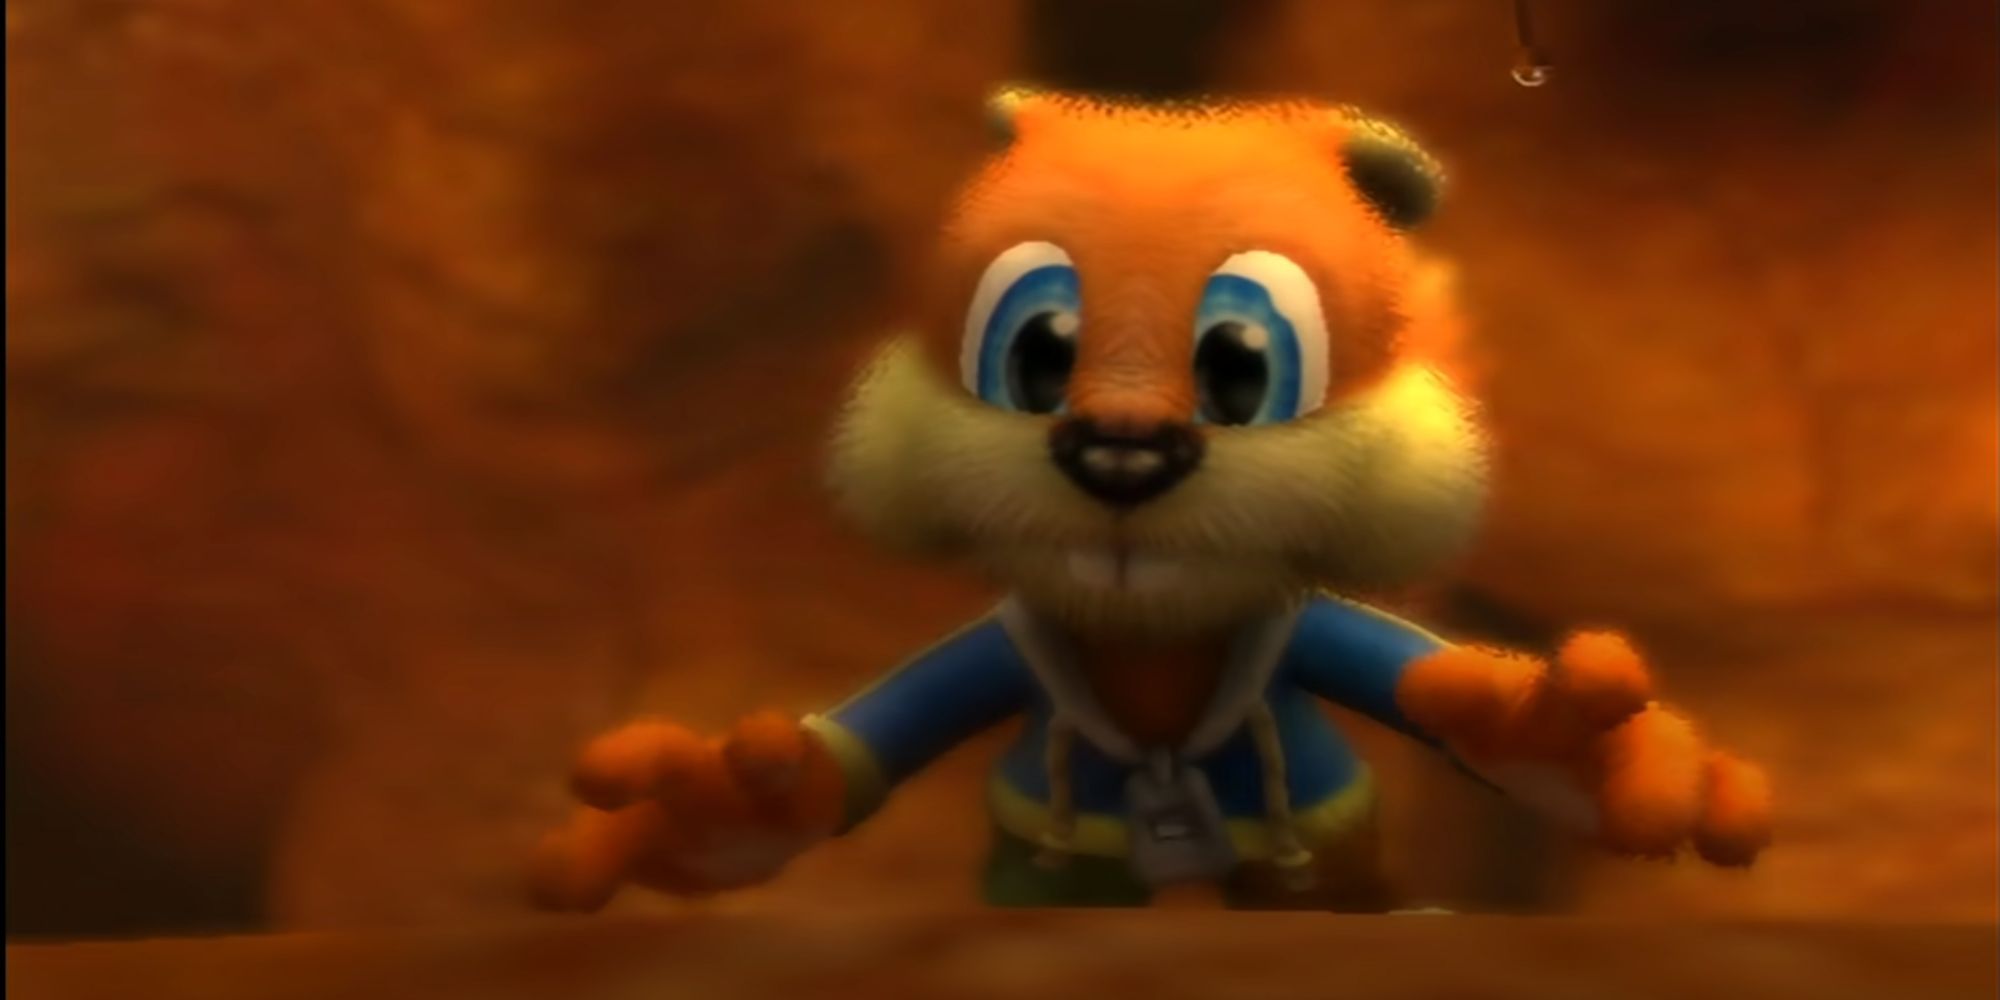 Conker about to encounter the Great Mighty Poo.